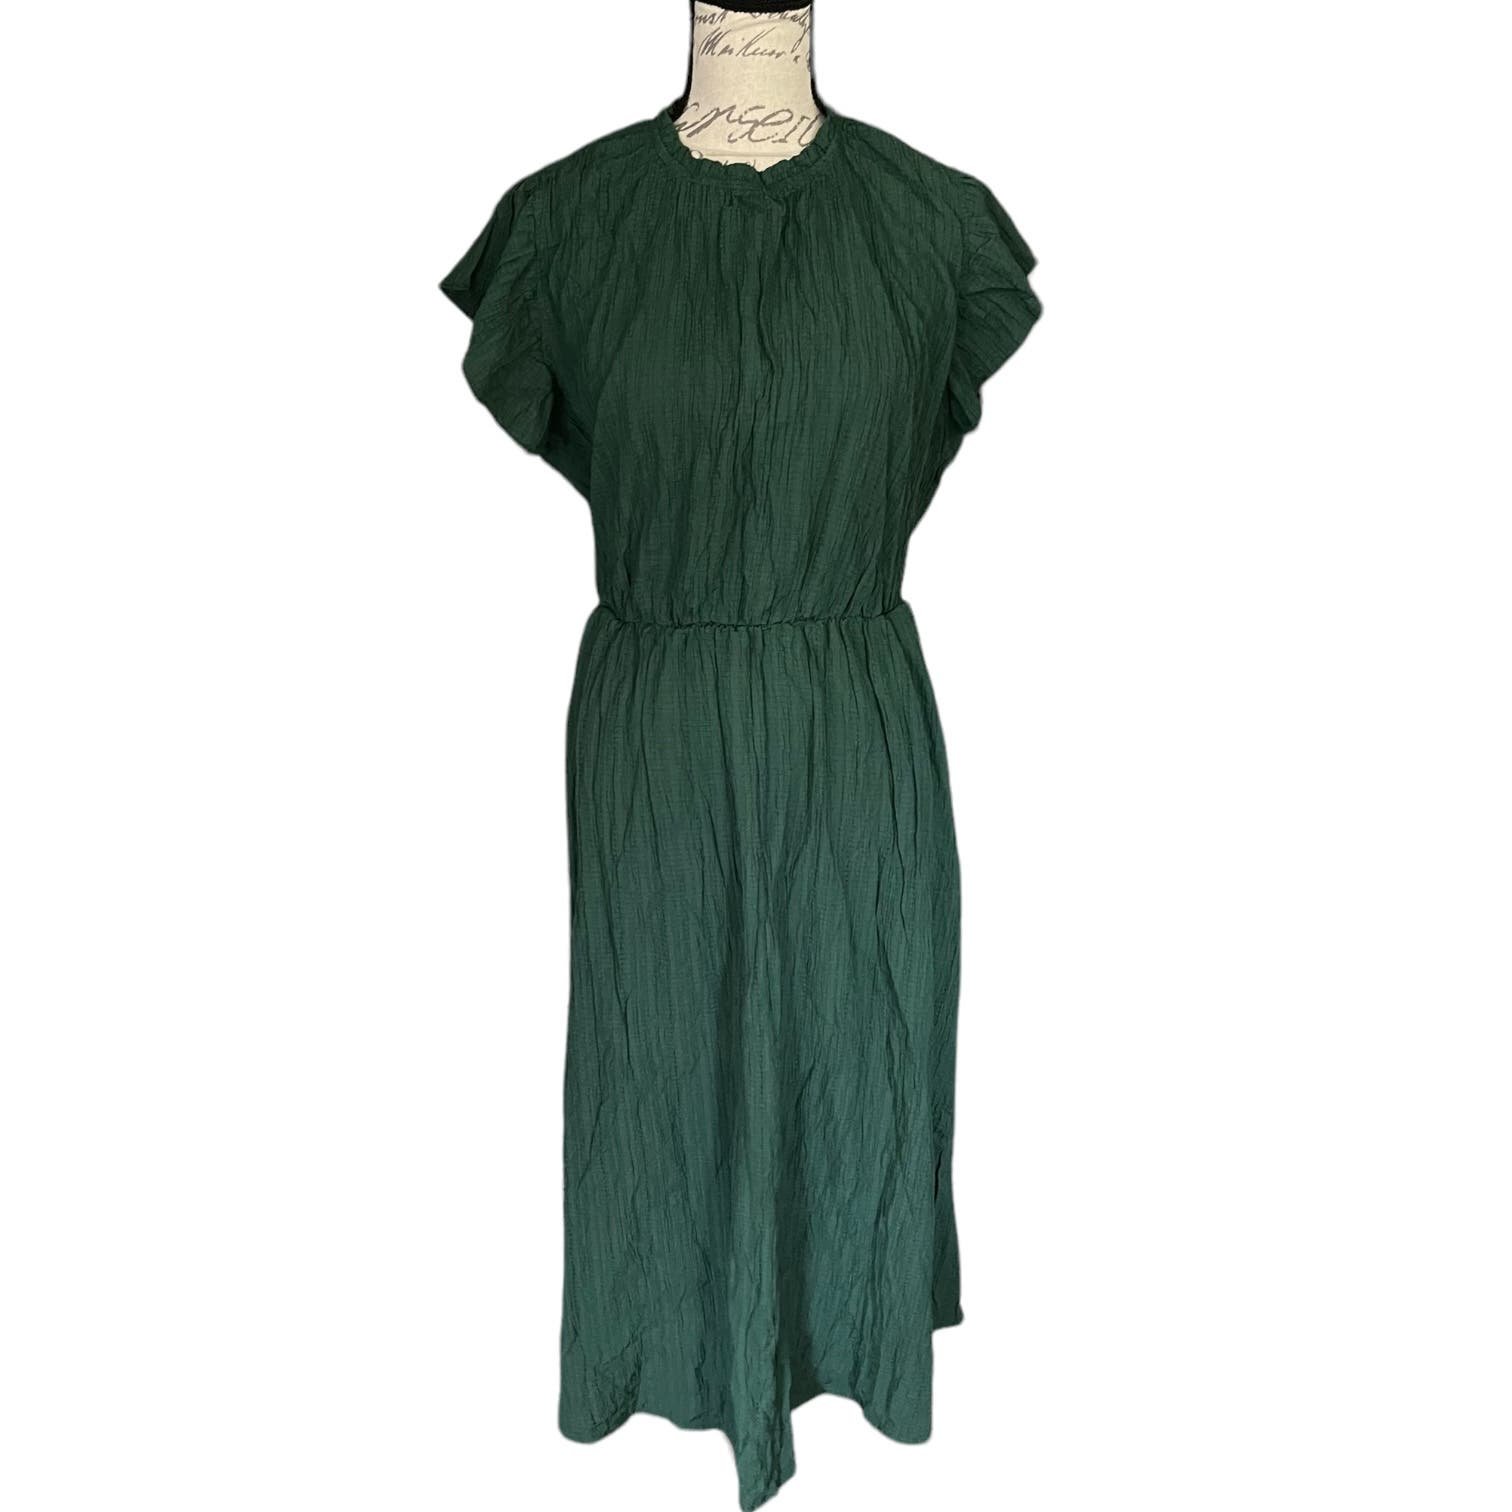 Wholesale price Bloomchic Green Flutter Sleeve Midi Dress Size 18/20 HB0UIywkY on sale